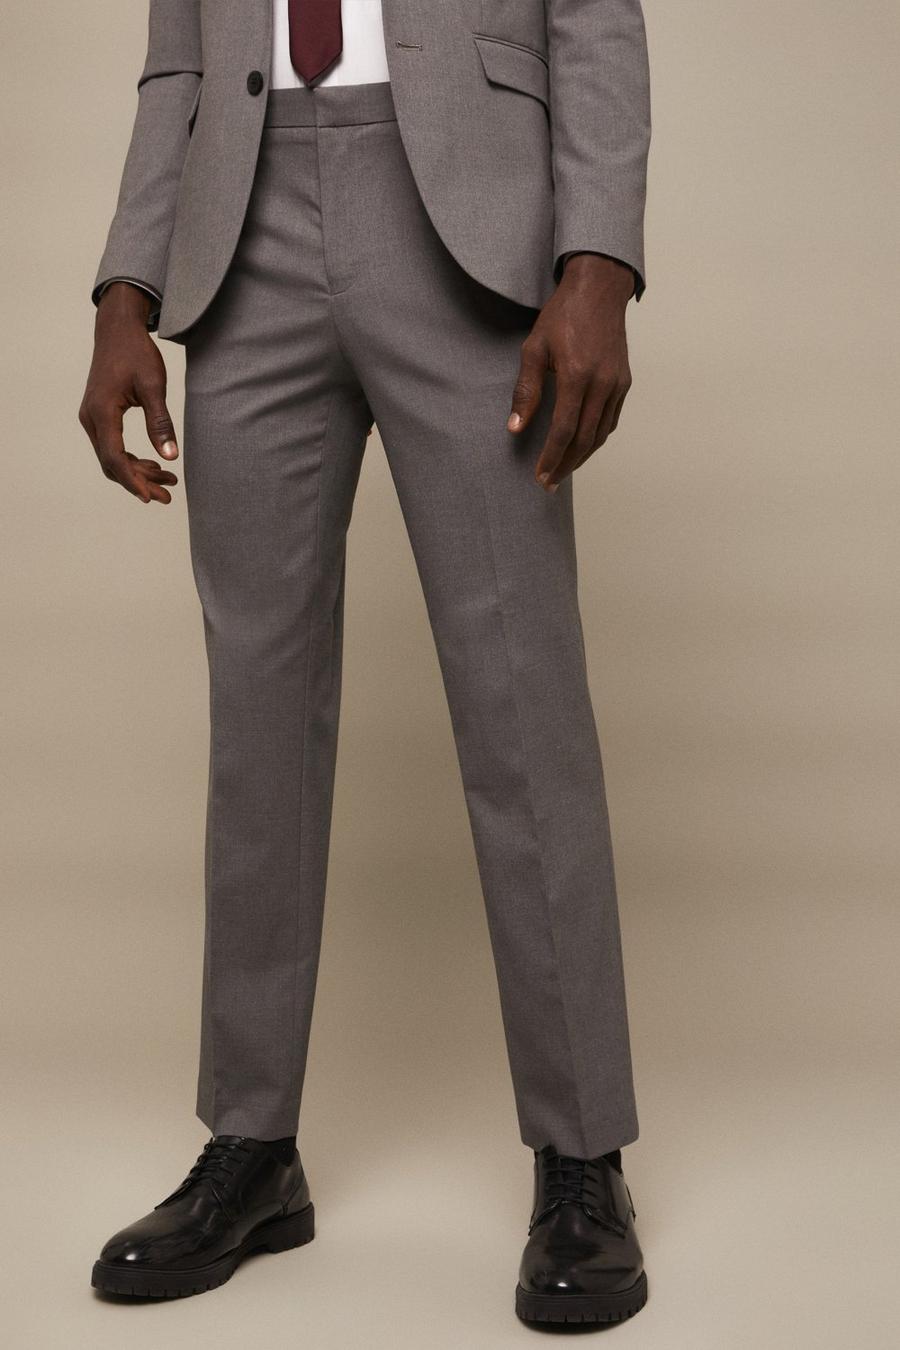 Plus And Tall Tailored Grey Essential Trousers